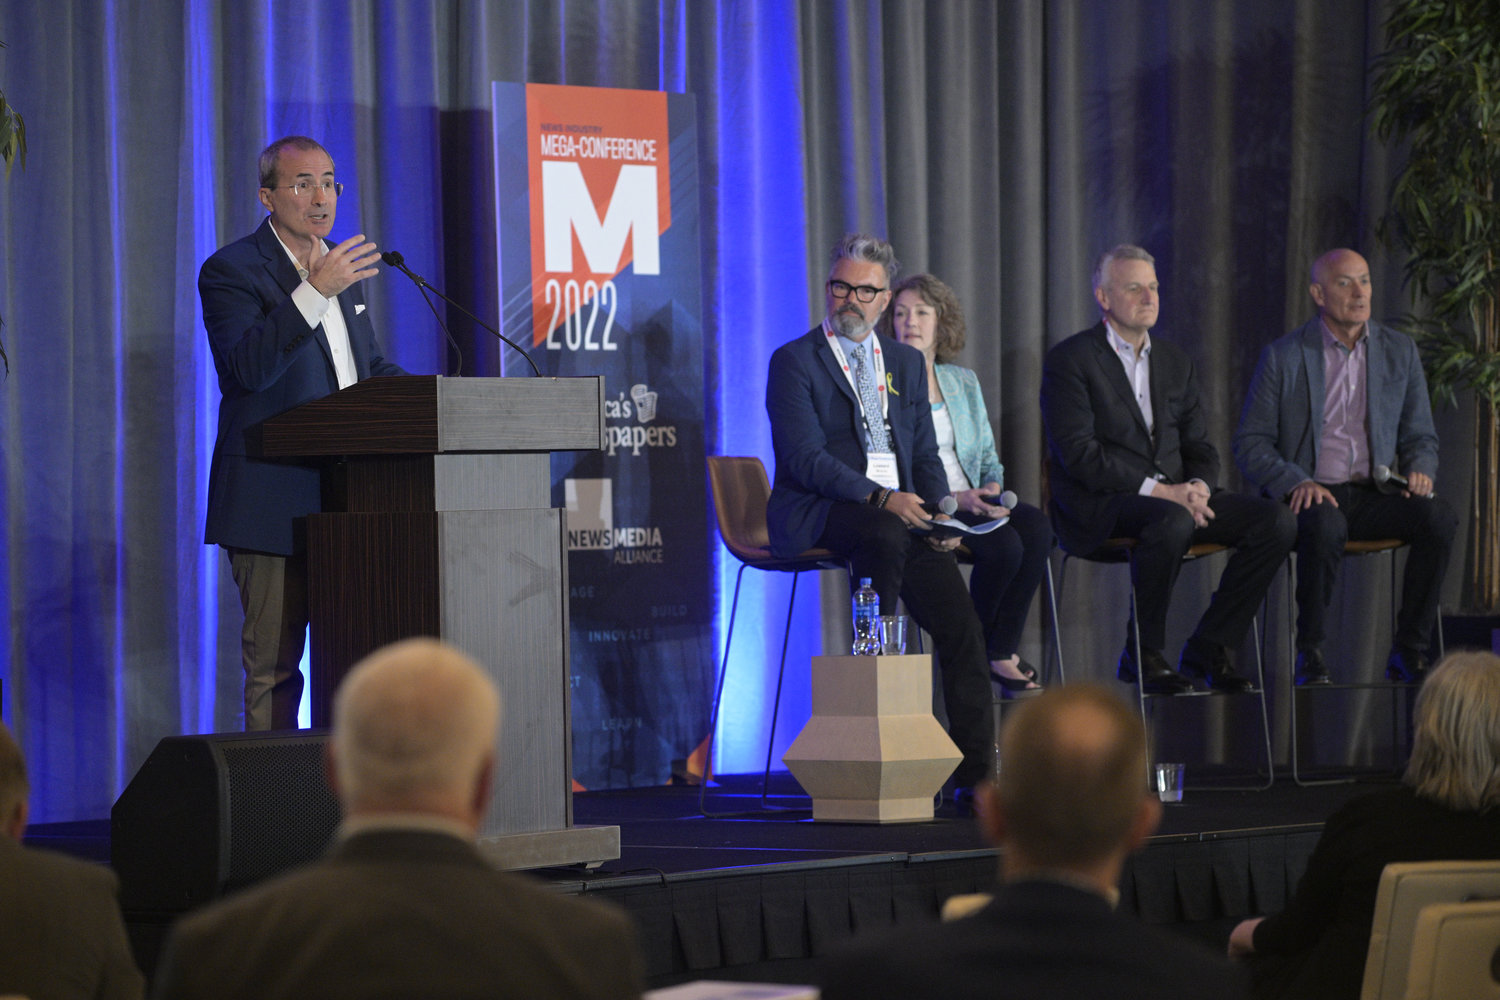 David Chavern, president and CEO of the News Media Alliance, facilitated a discussion with four media executives to explore where the industry is going and what needs to happen today to ensure future success. (Photo by Phelan M. Ebenhack)